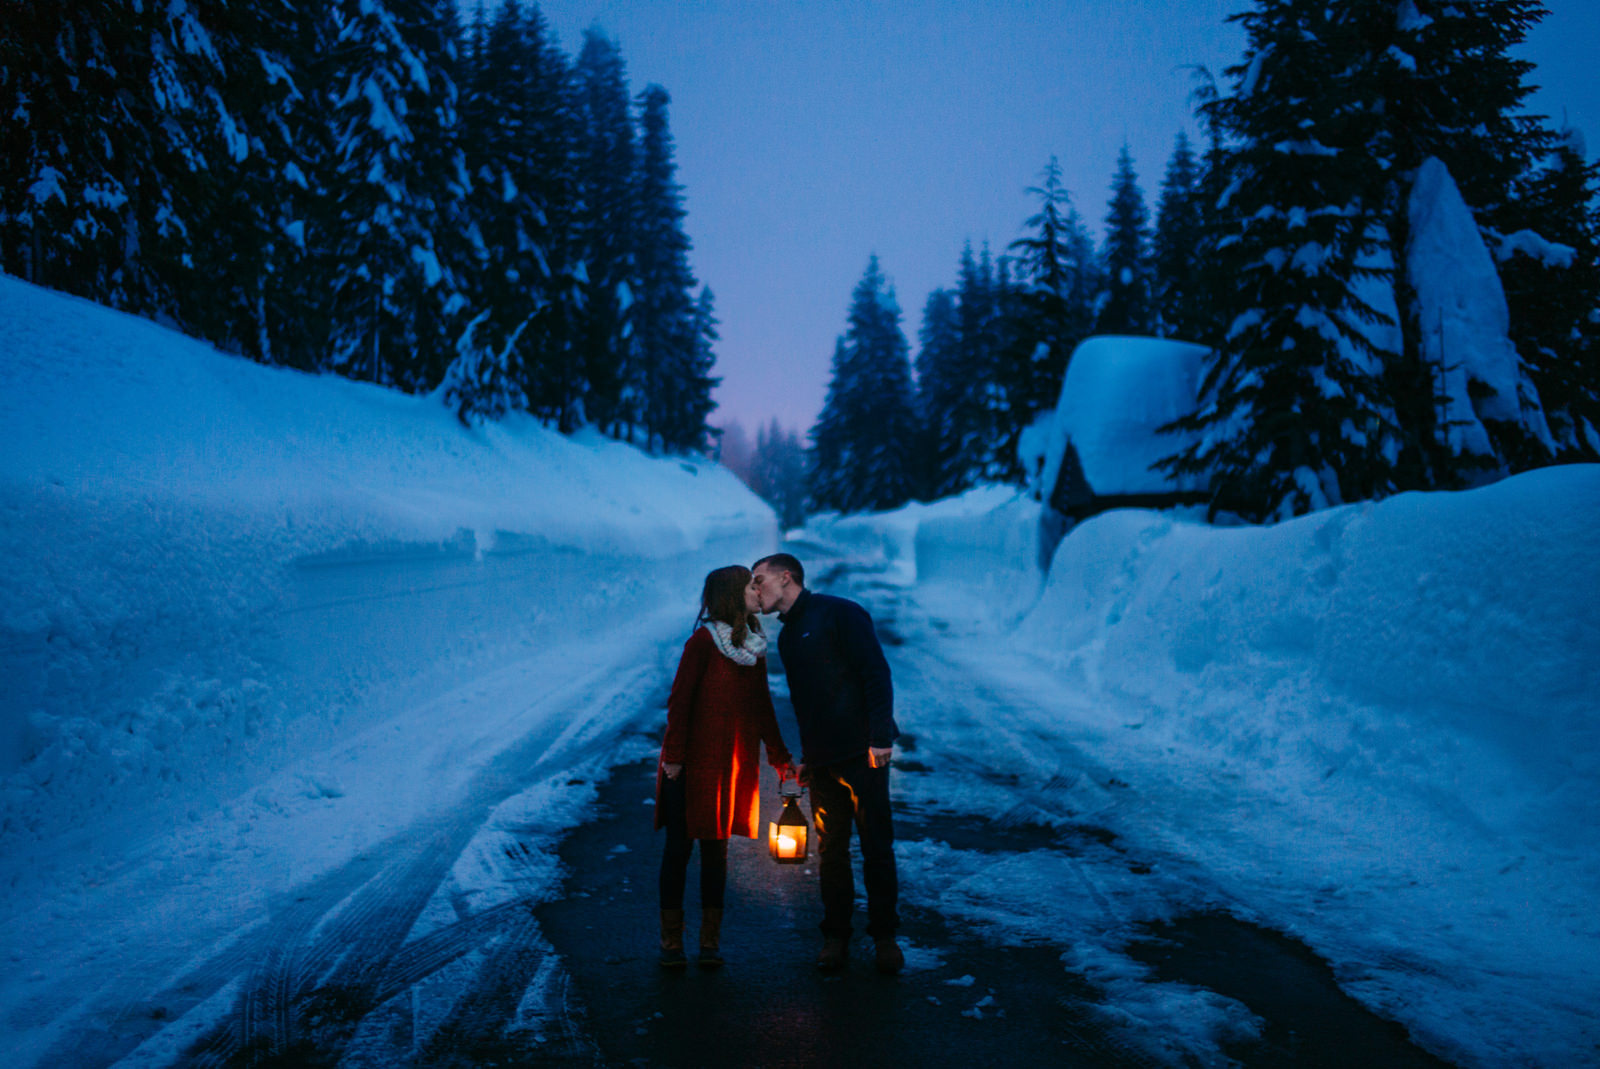 257-moody-evening-photo-with-couple-holding-lantern-in-the-snow-by-ryan-flynn-photography.jpg